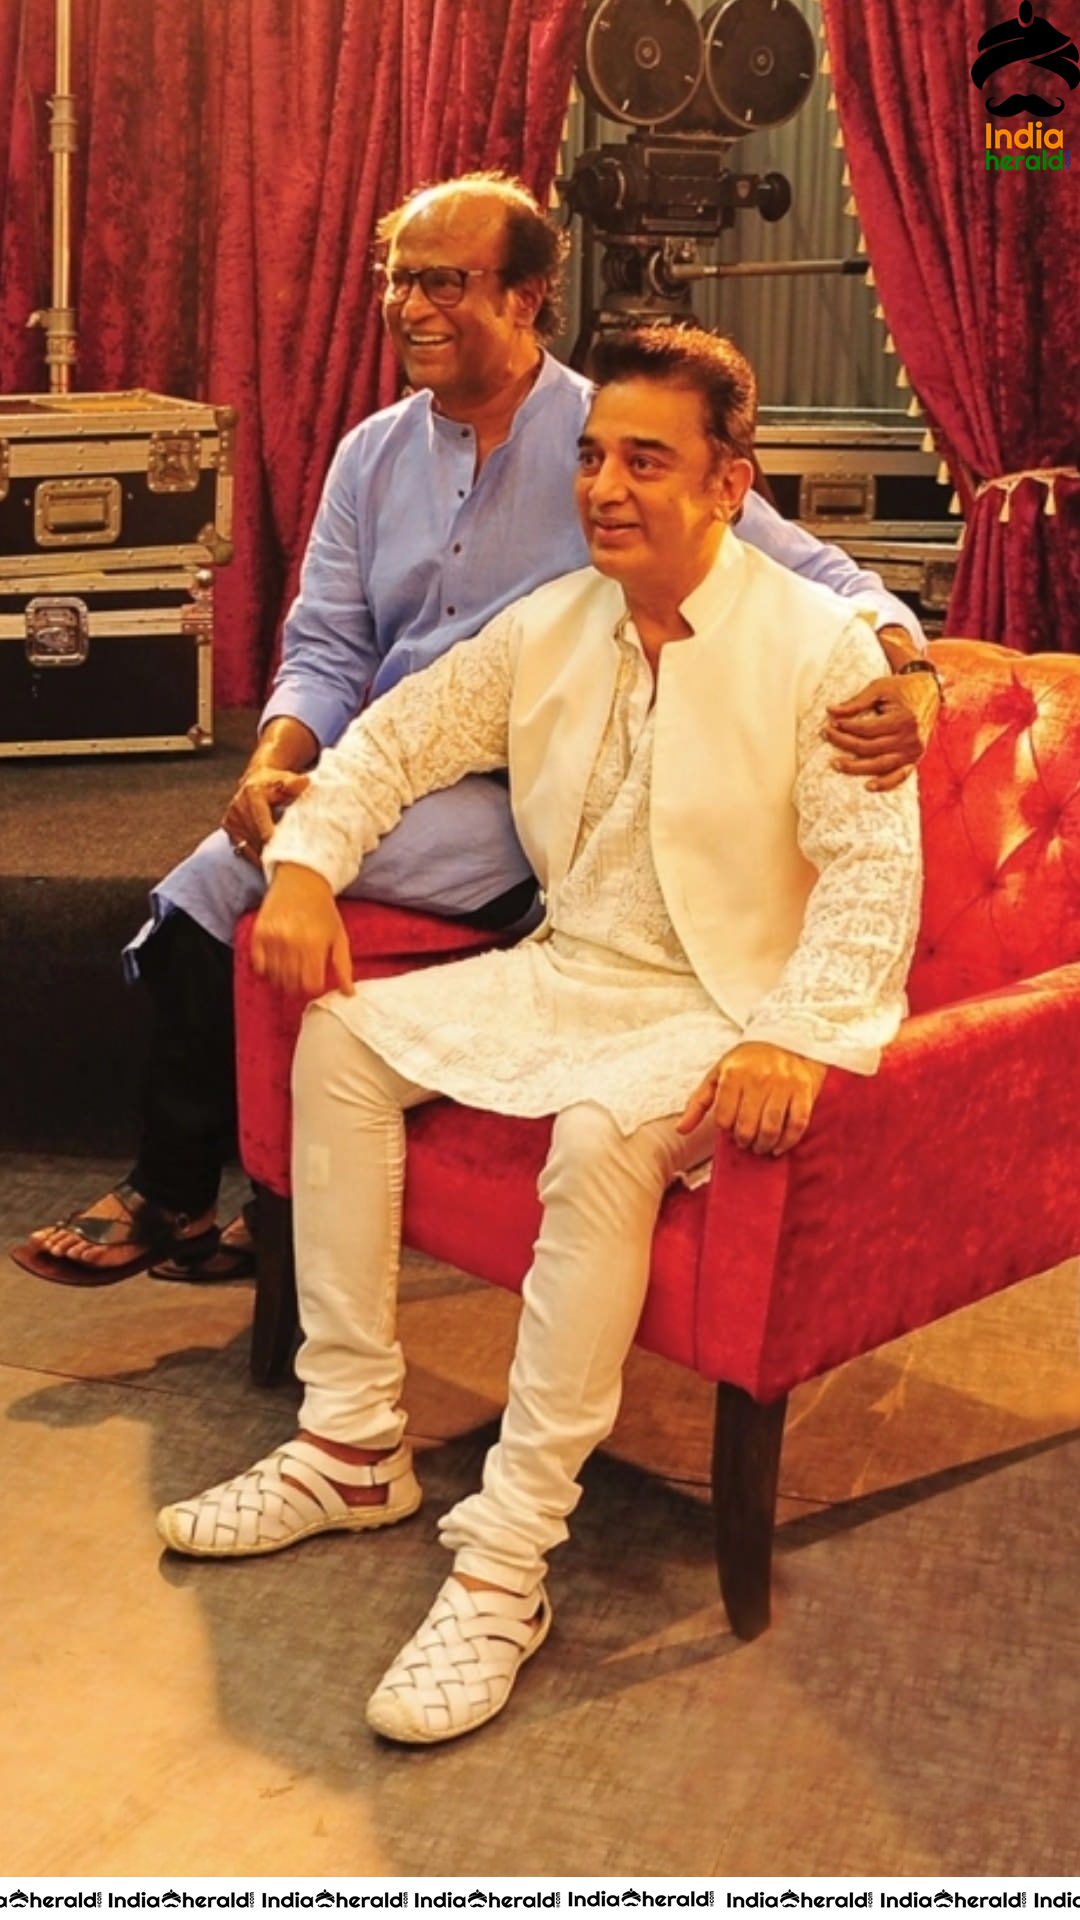 Legendary Actors Kamal Haasan and Rajini Takes a Photo Together after a Long Time